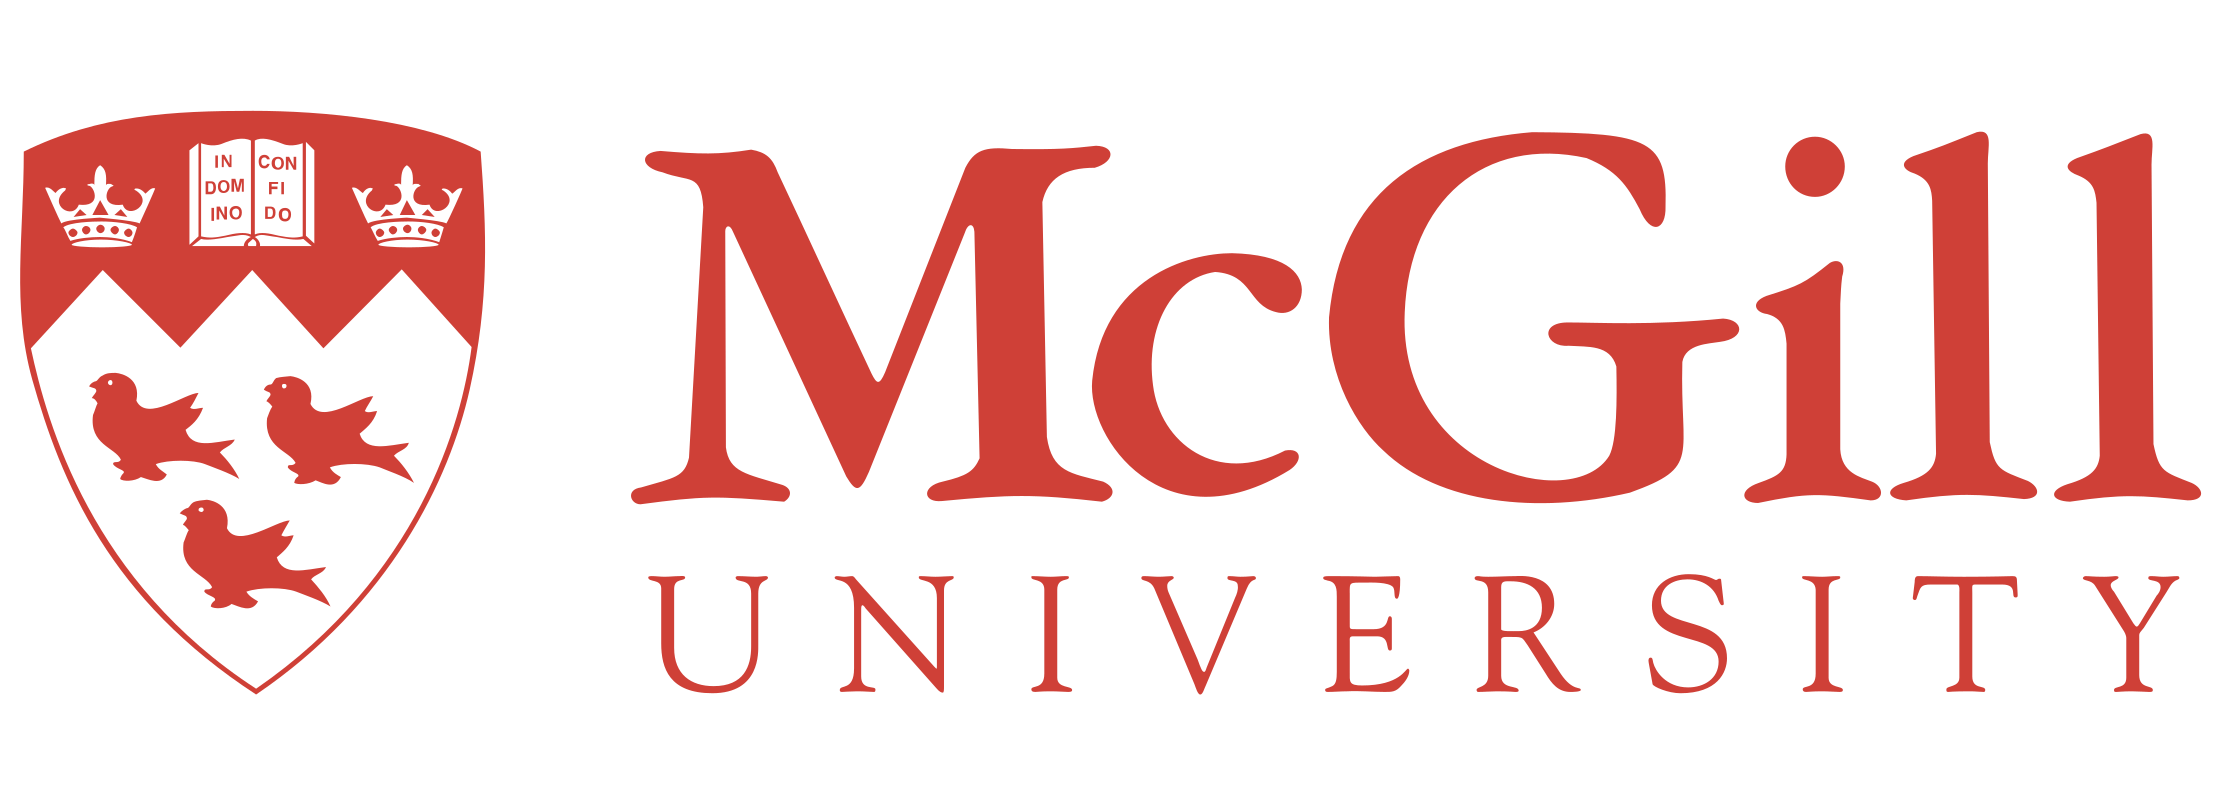 Nursing | Bachelor's degree | Health & Well-Being | On Campus | McGill University | Canada